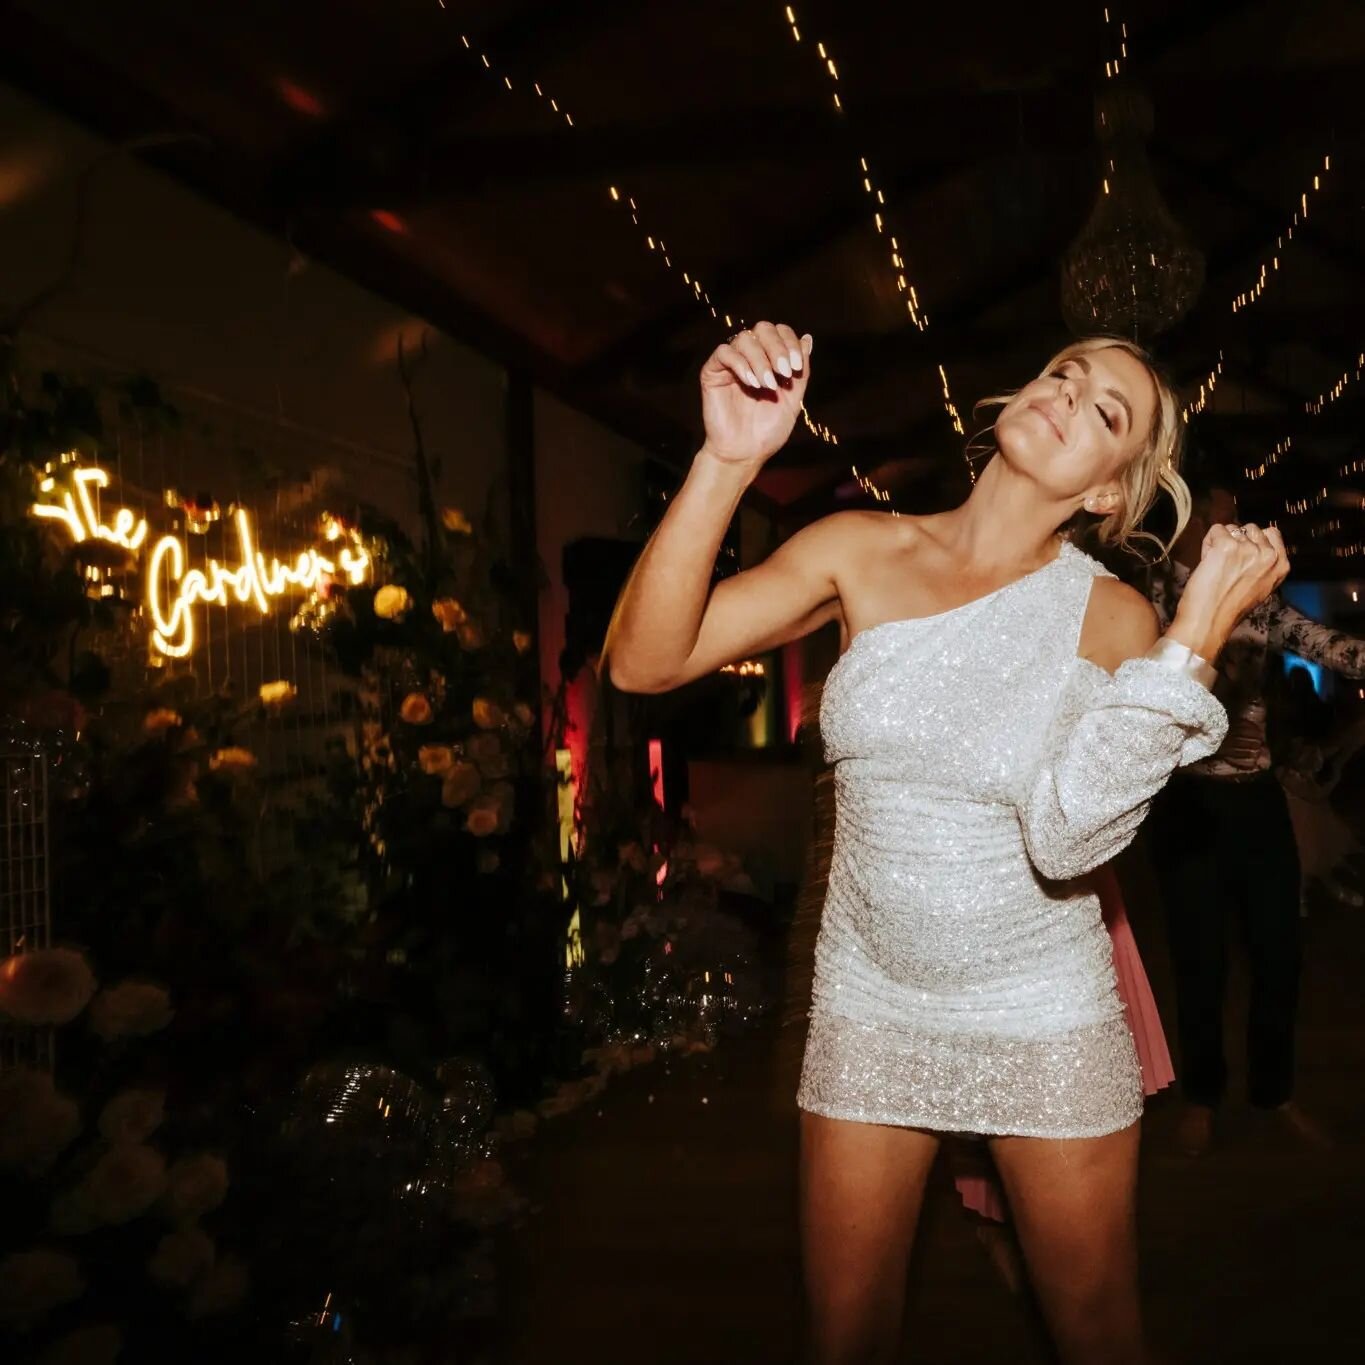 Dance like you mean it! 
Always the best sort of impressed when your bride changes into her party dress and slays the dancefloooooor.
📸@jamessimmonsphotography